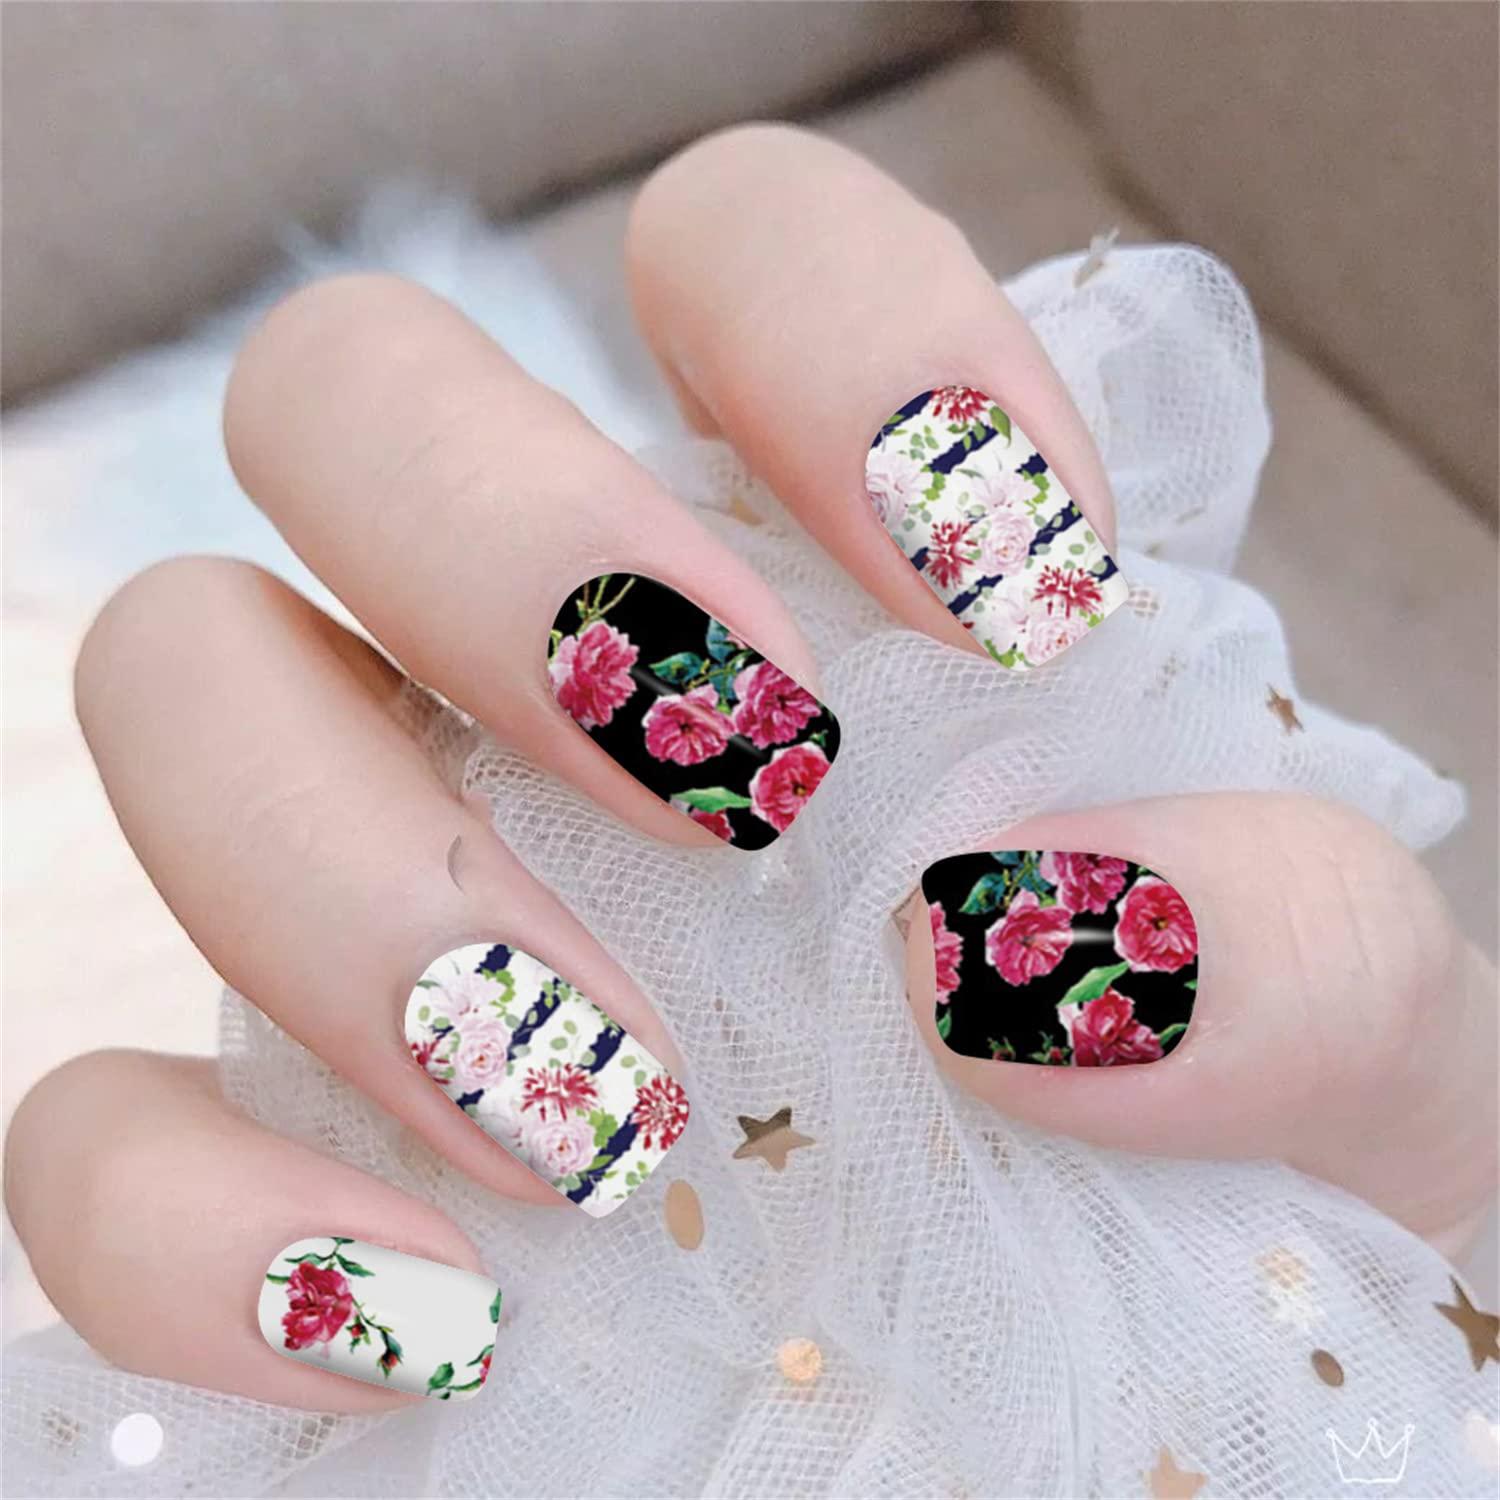 Amazon.com: TailaiMei 12 Sheets Christmas Full Wraps Nail Polish Stickers,  Self-Adhesive Nail Art Decals Strips with 2Pc Nail File, Glitter Manicure  Kits for Nail Art Design : Beauty & Personal Care